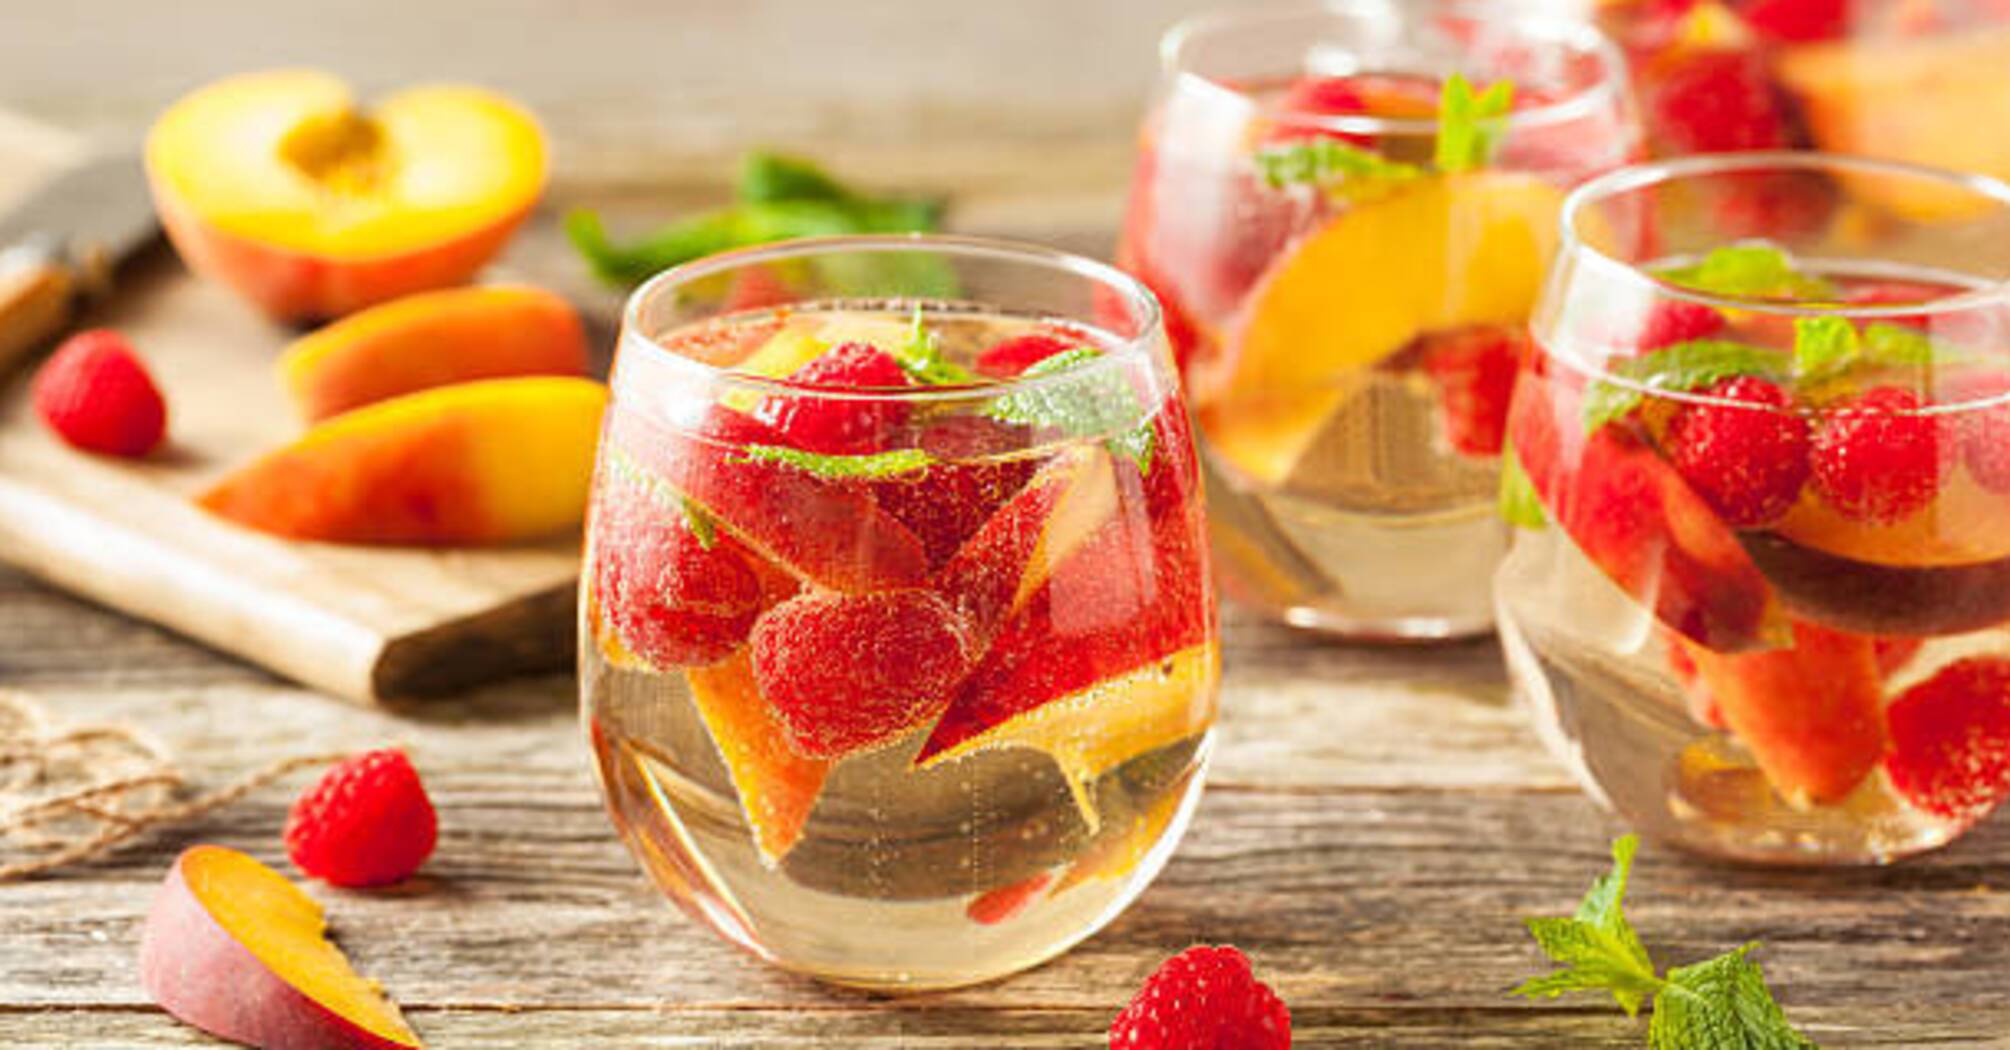 Better than mulled wine: how to make refreshing sangria at home